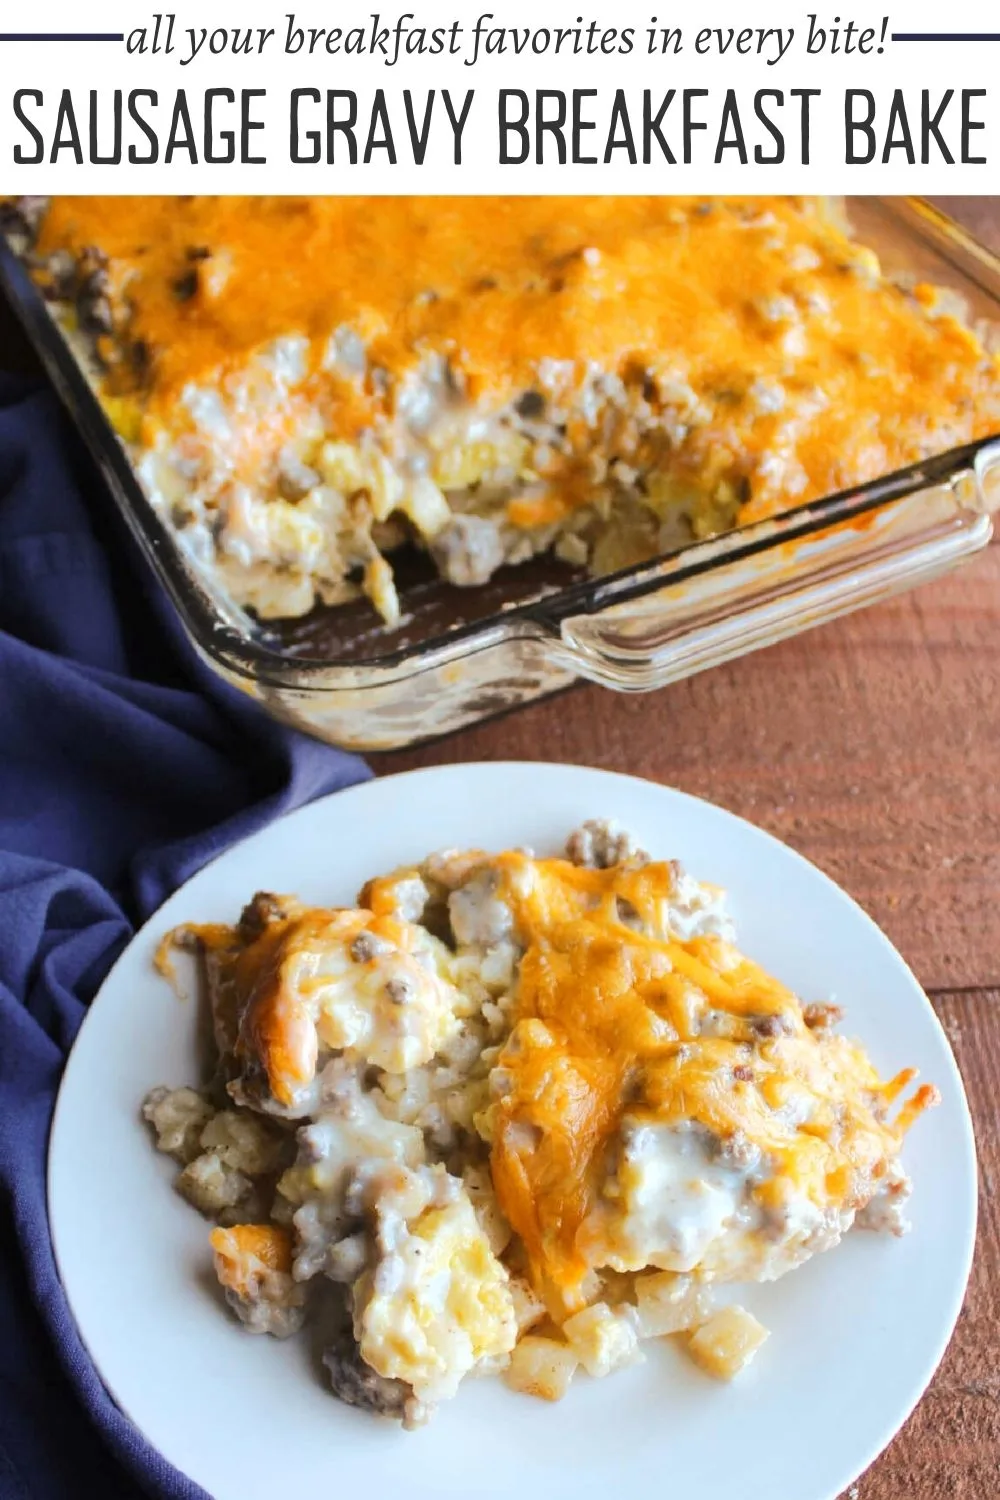 Every layer of this sausage gravy breakfast casserole is good on its own, but baked together, they form an amazing dish. This hearty mix of potatoes, scrambled eggs, sausage gravy and cheese is sure to become a new favorite.